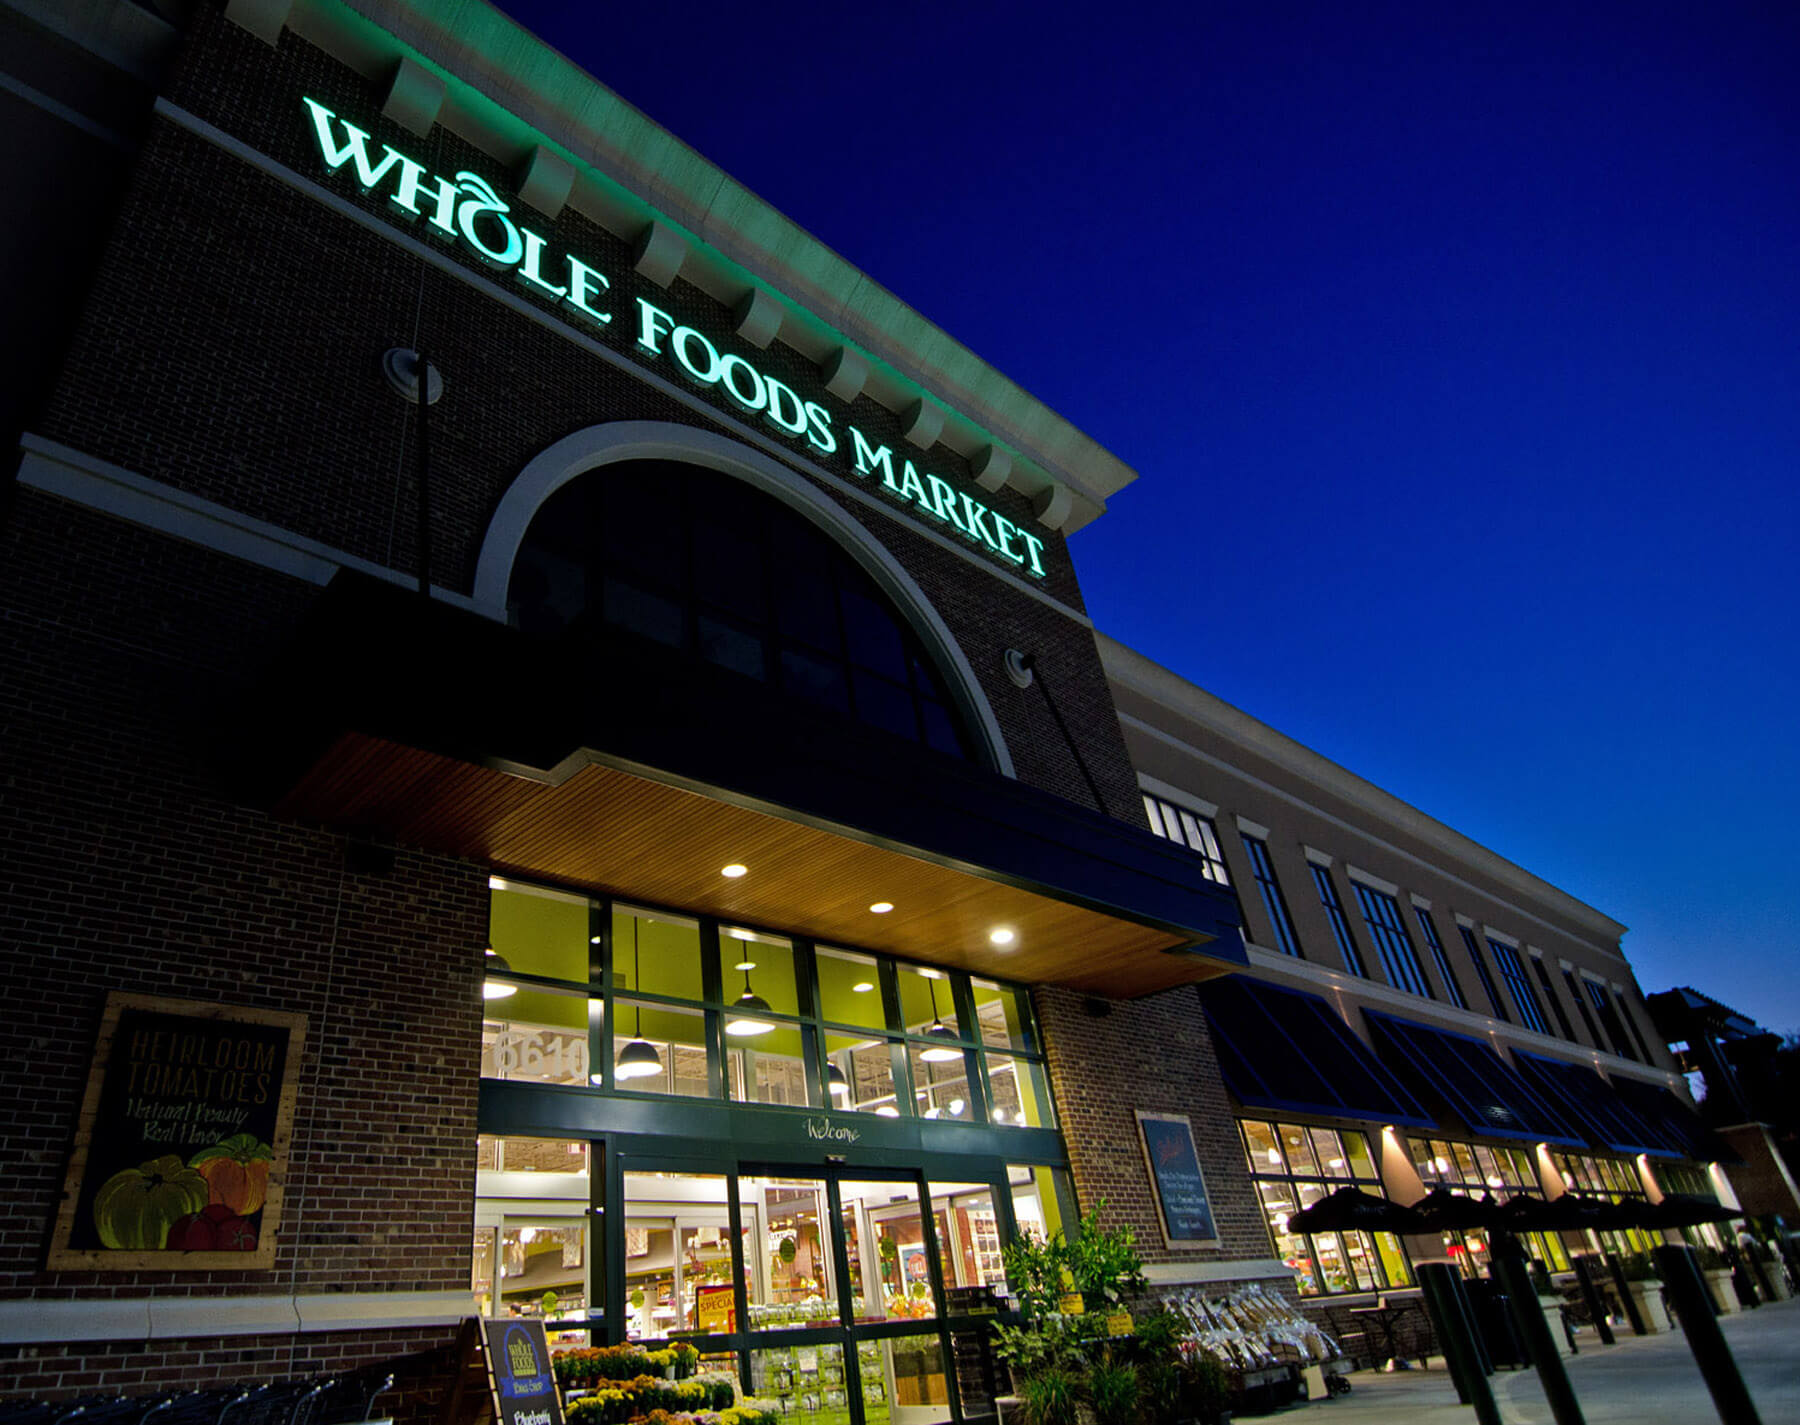 Whole Foods workers will stay out sick to protest the company's Covid-19 policies (March 2020)